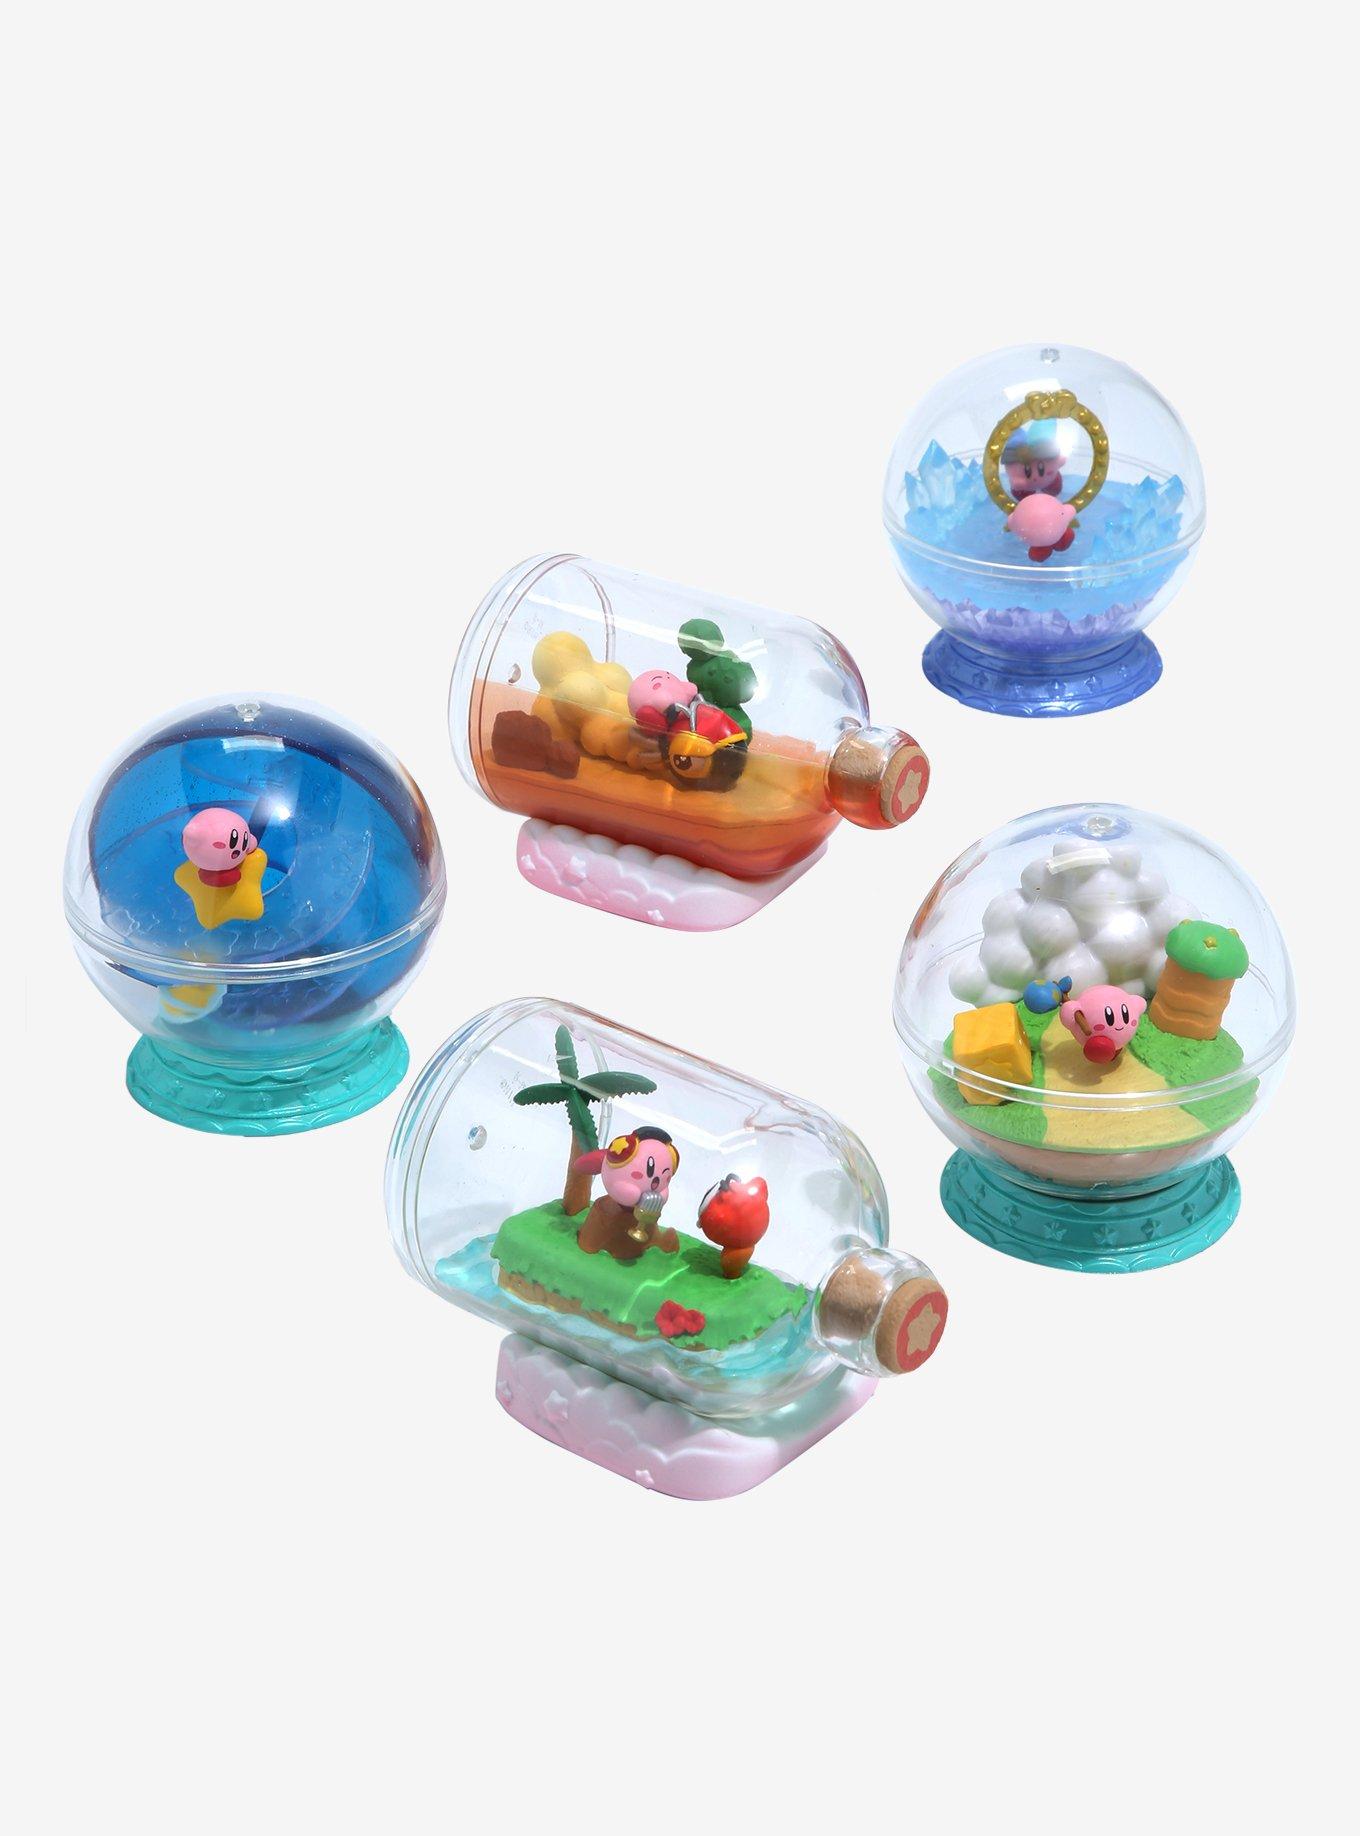 Nintendo Kirby Re-Ment Terrarium Collection A New Wind for Tomorrow Blind Box Figure, , alternate